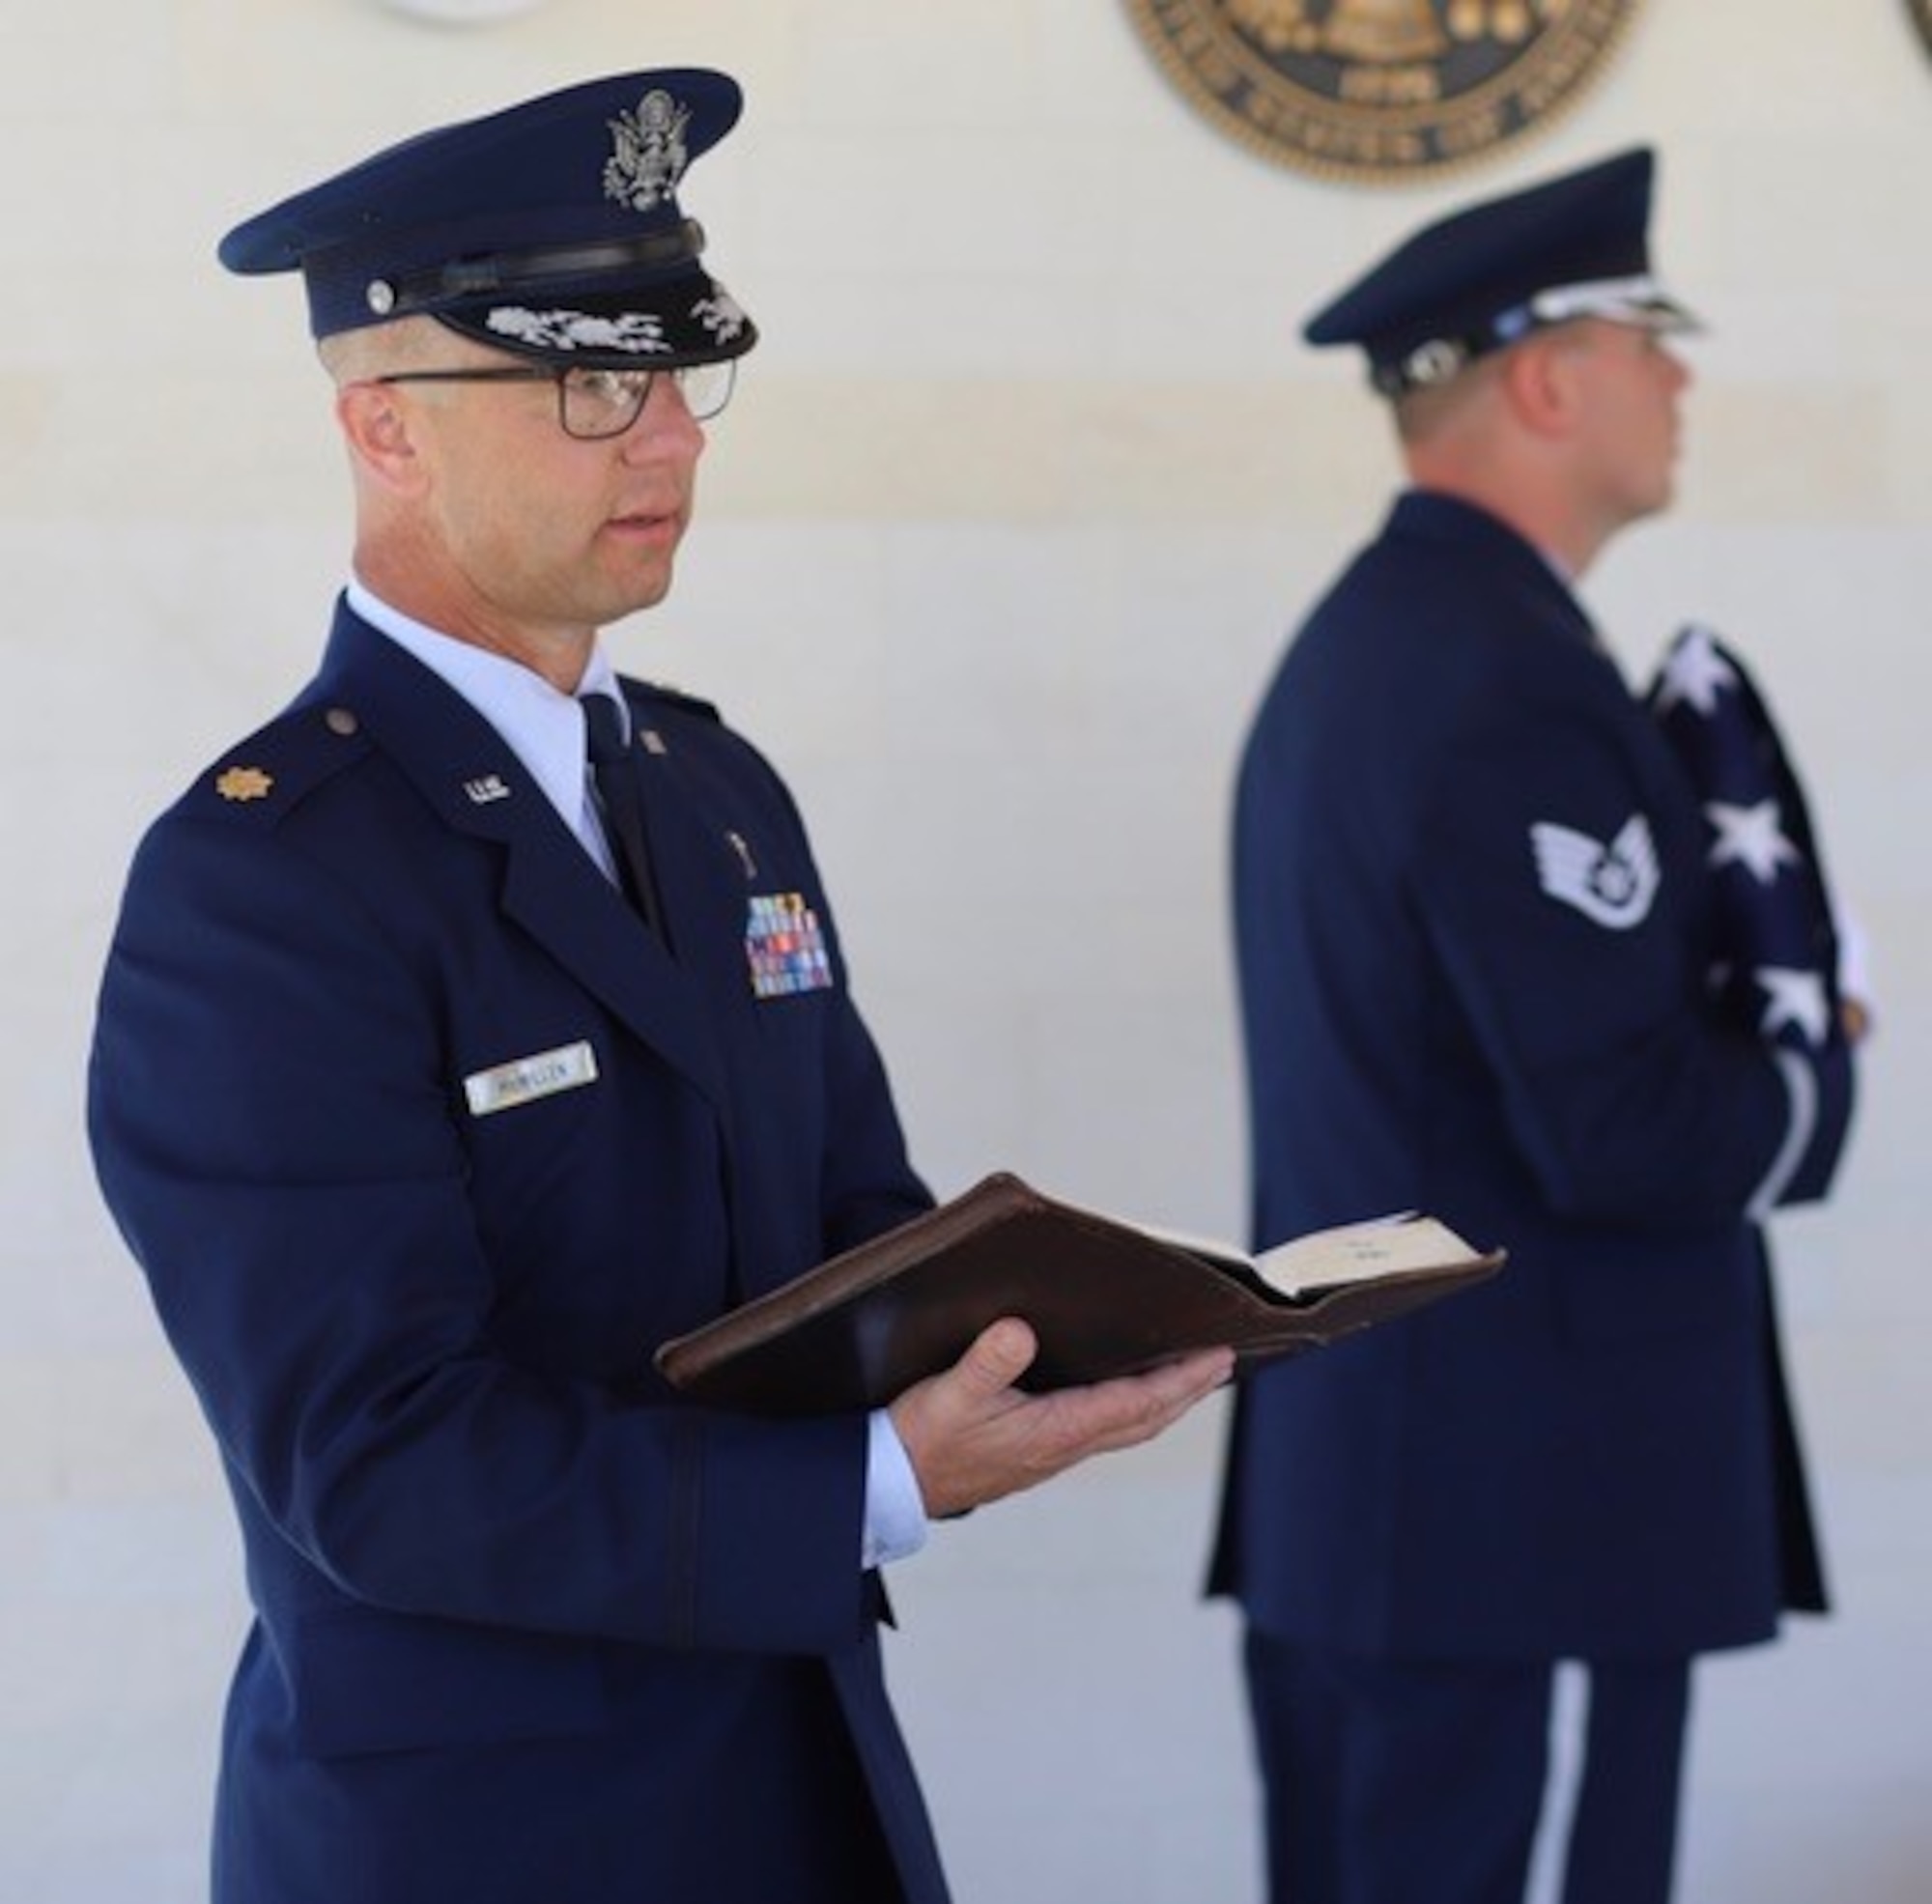 Chaplain in military uniform holds bible with an honor guard member holding an American flag in the background.